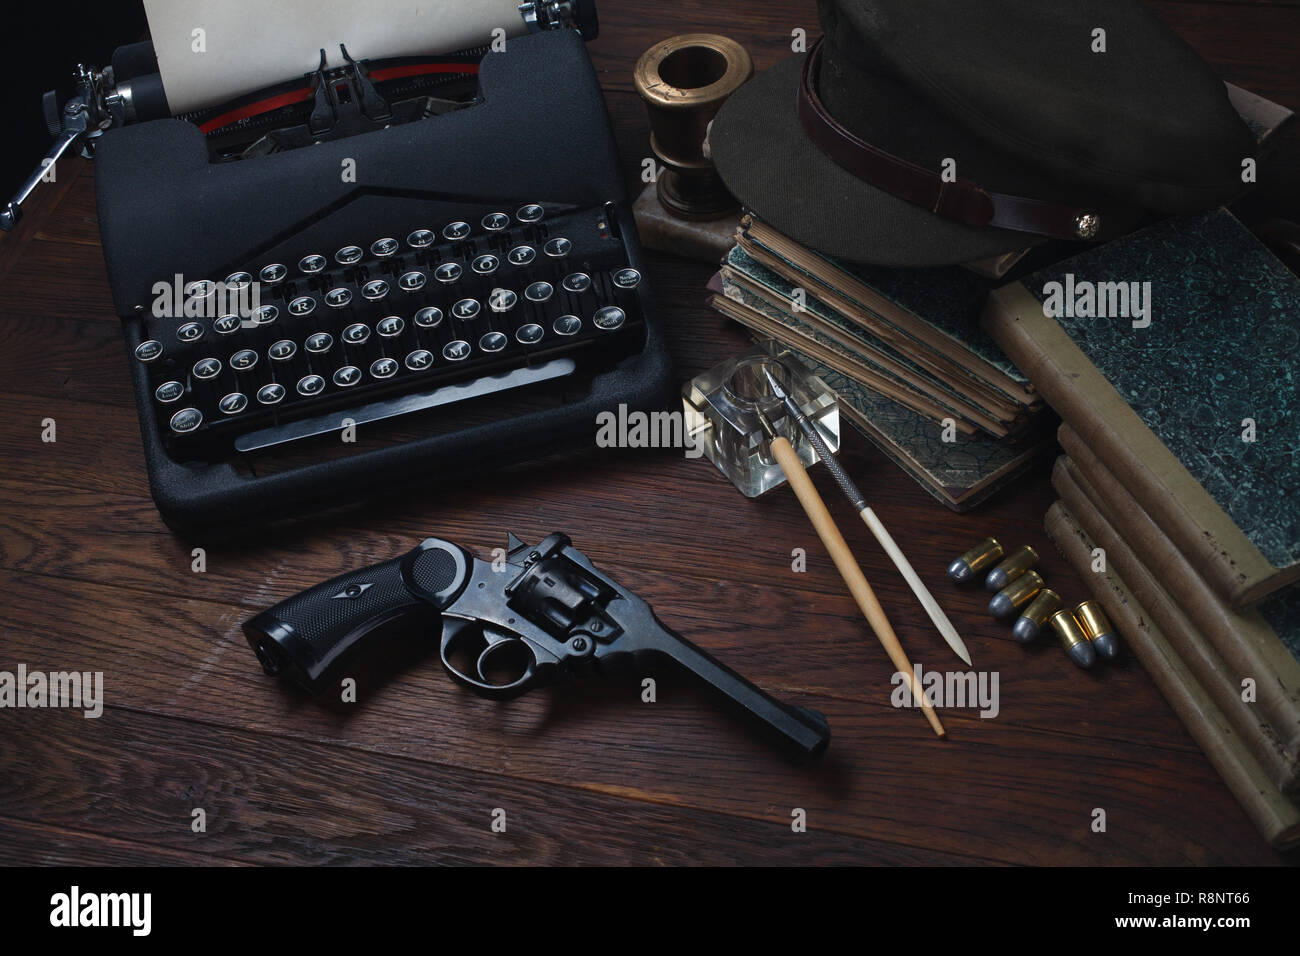 Writing a detective story - old retro vintage typewriter and revolver gun with ammunitions, books, papers, old ink pen on wooden table Stock Photo